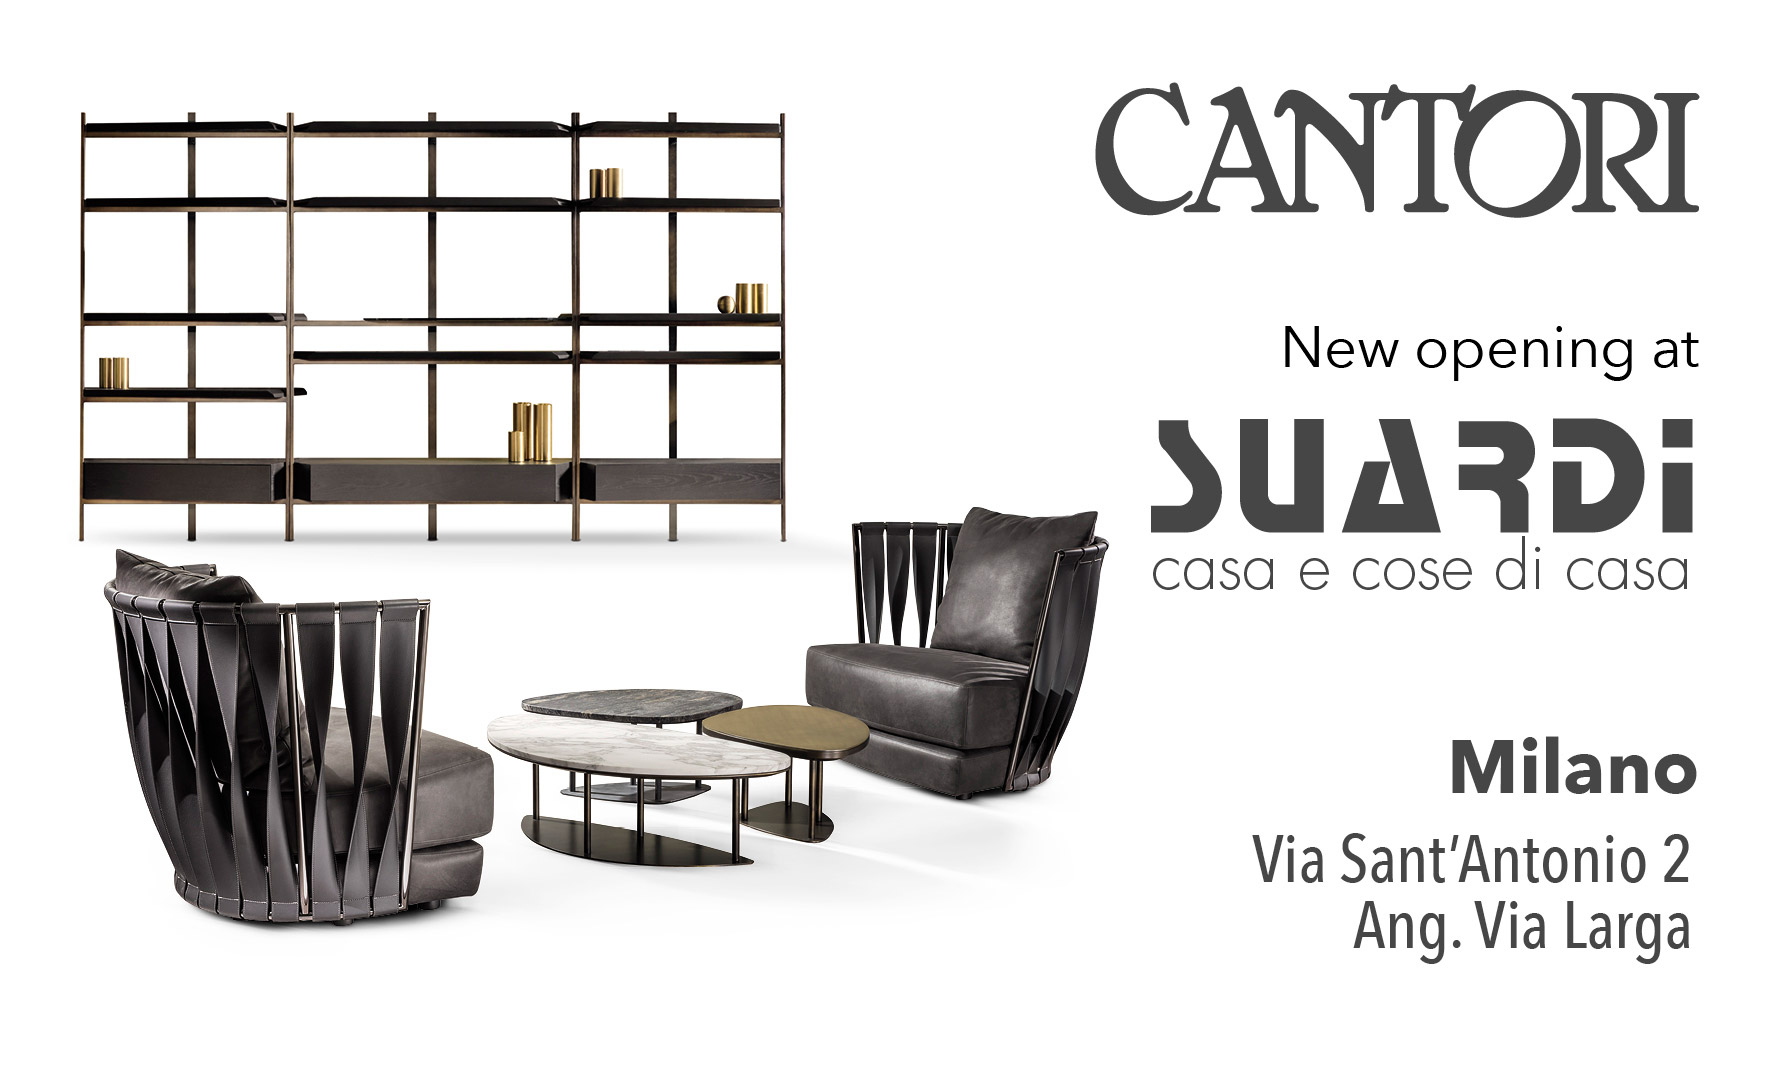 07/10/2022 A new Milanese storefront for Cantori - Cantori